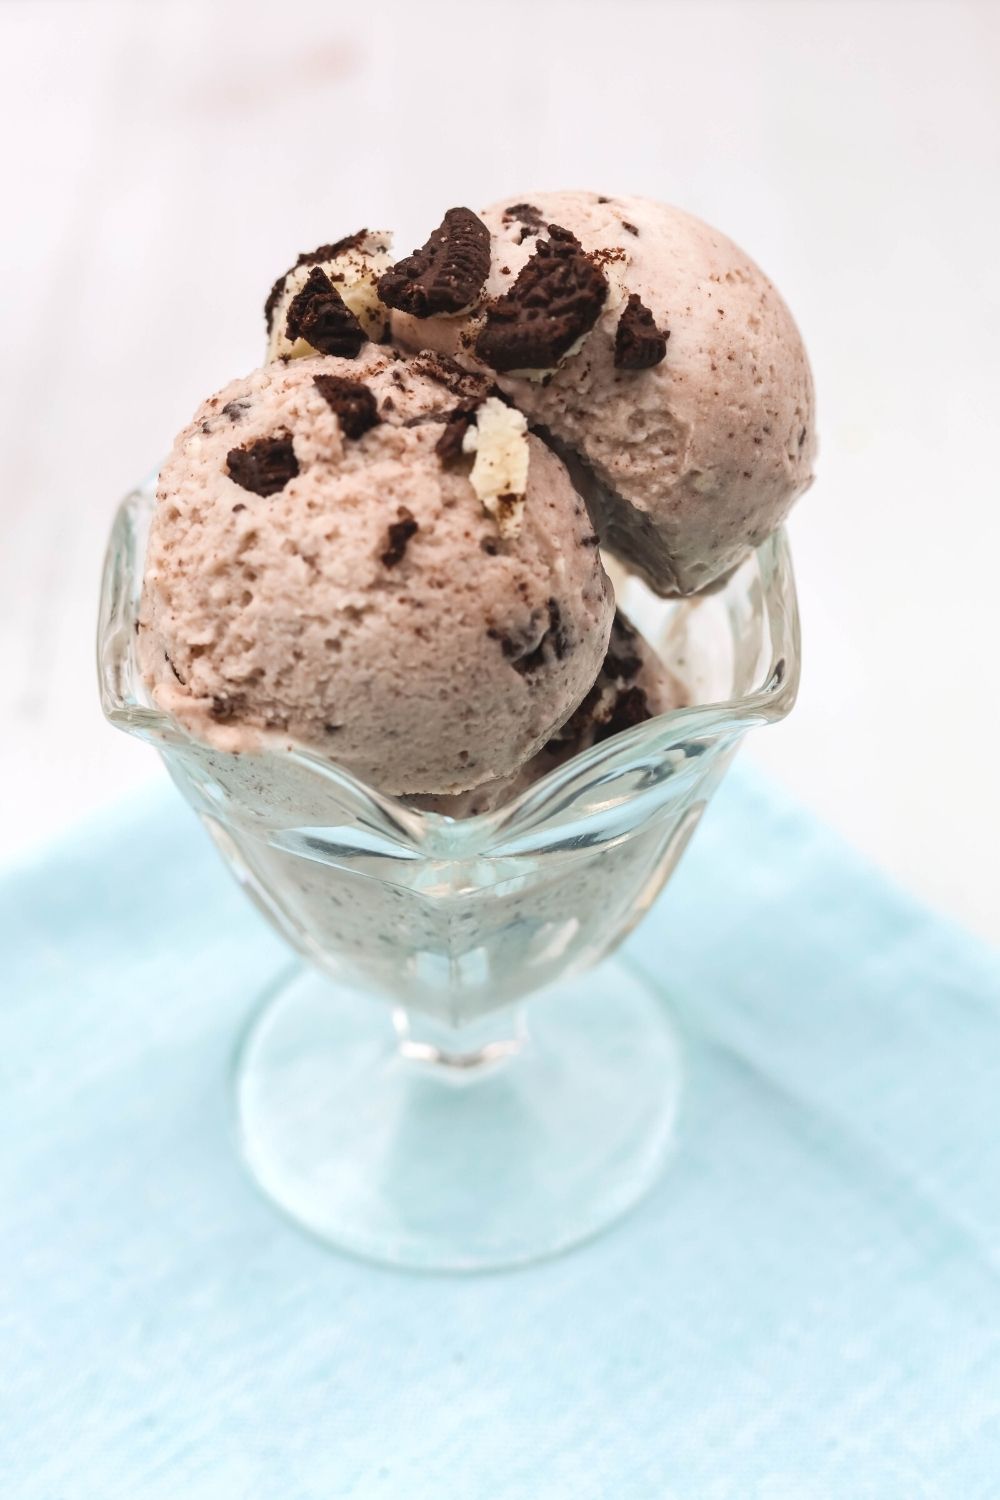 close-up view of scoops of Ninja Creami high protein cookies and cream ice cream served in a glass ice cream dish. Oreo cookie pieces are sprinkled over the scoops.